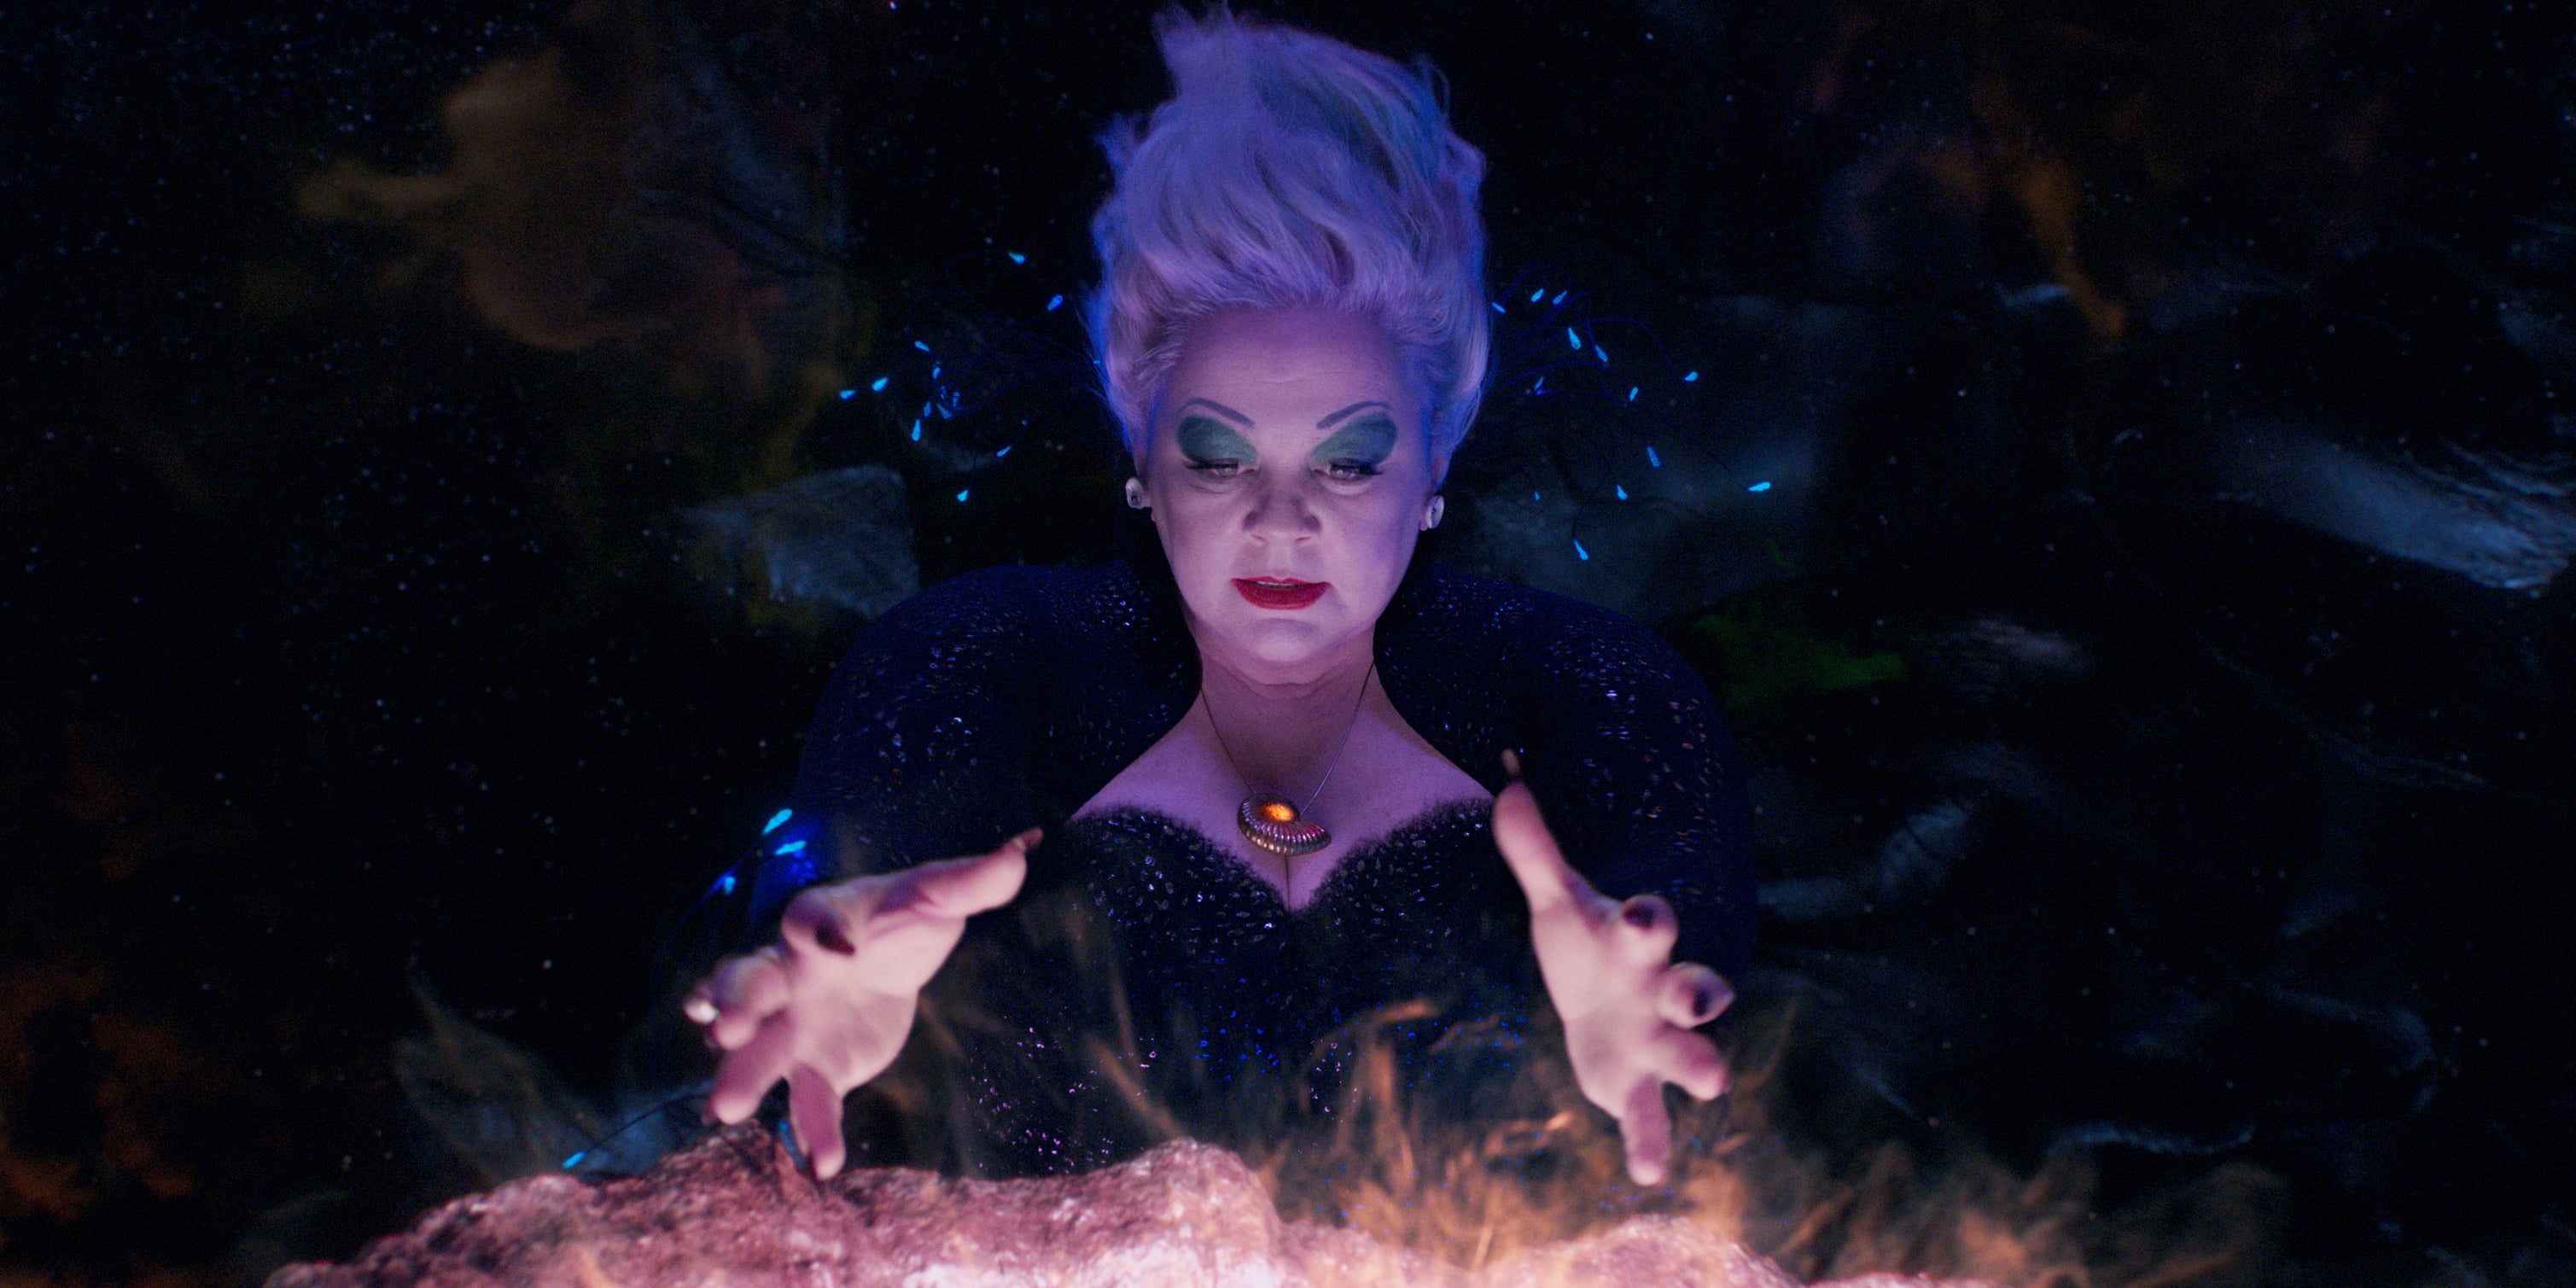 Ursula Costume Plus Size, Spread out the tulle (or add more) so